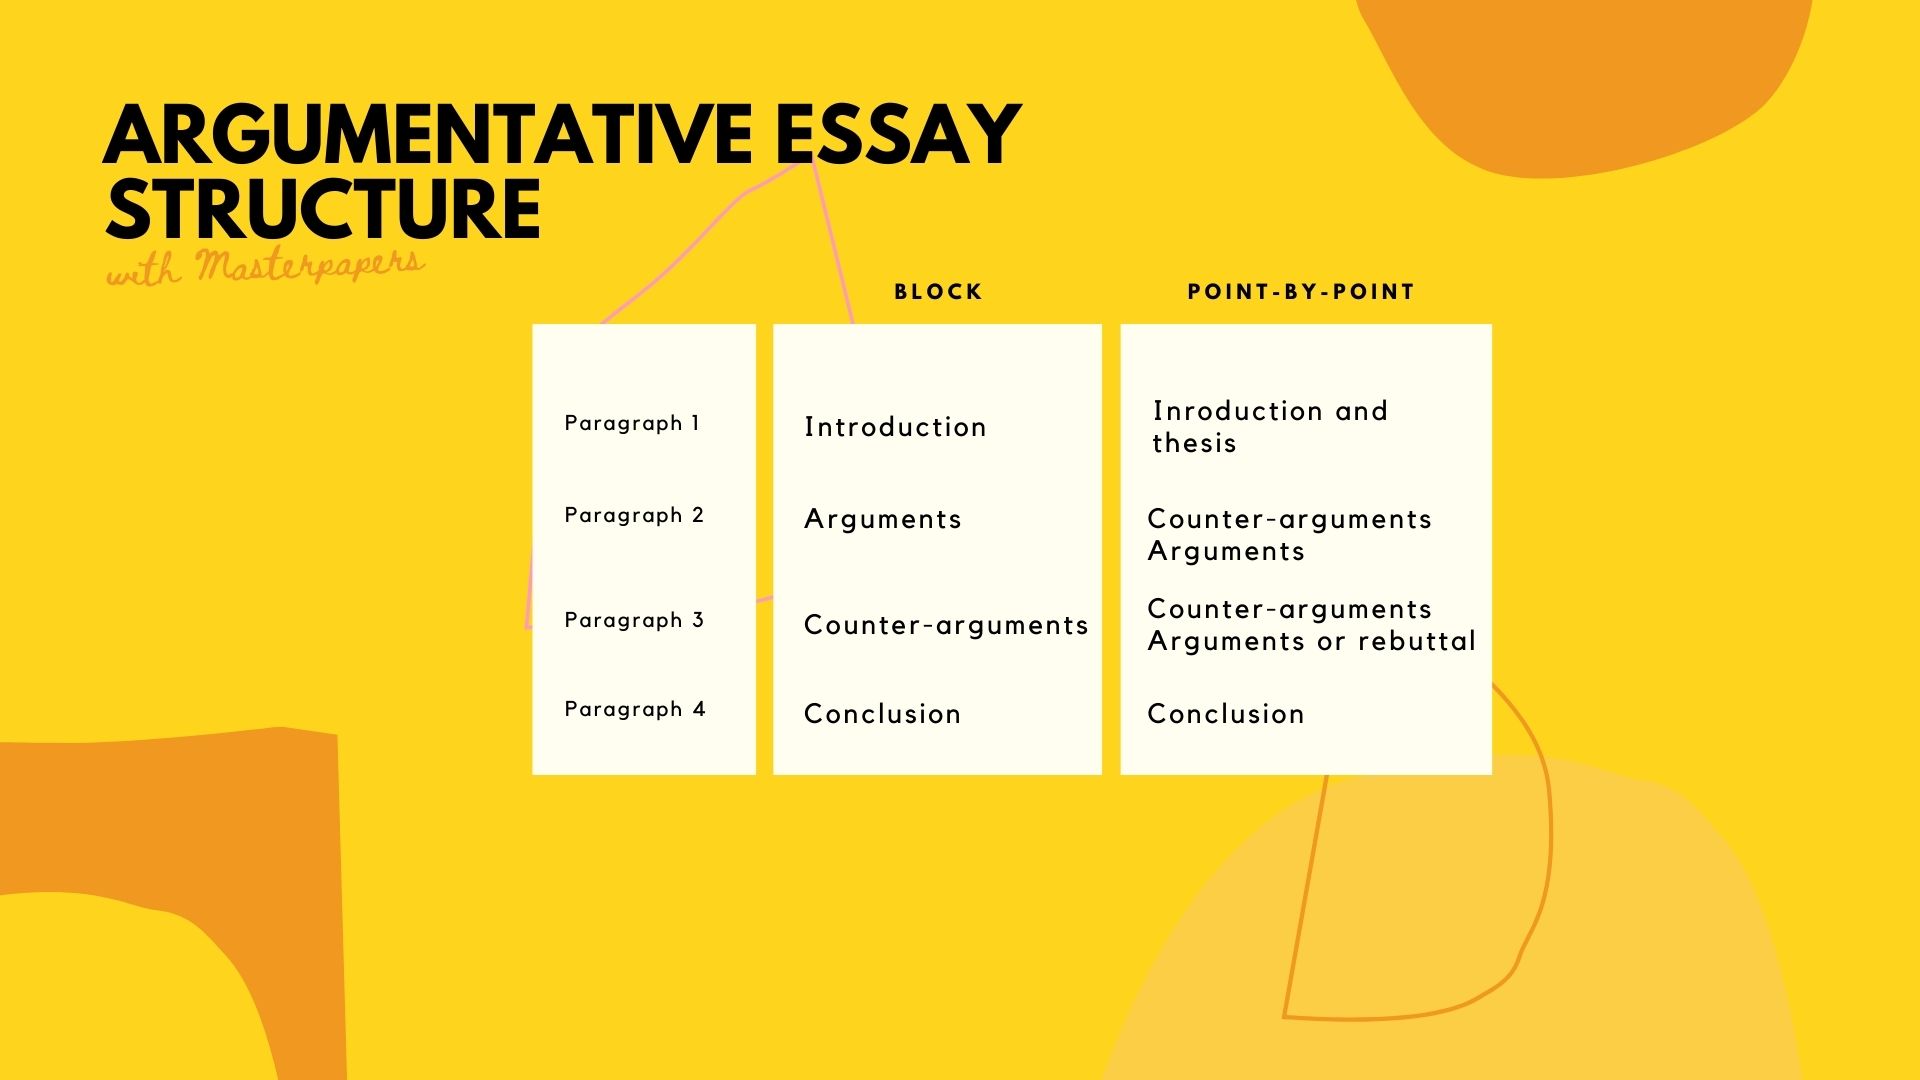 what are the features and organisational structure of an argumentative essay